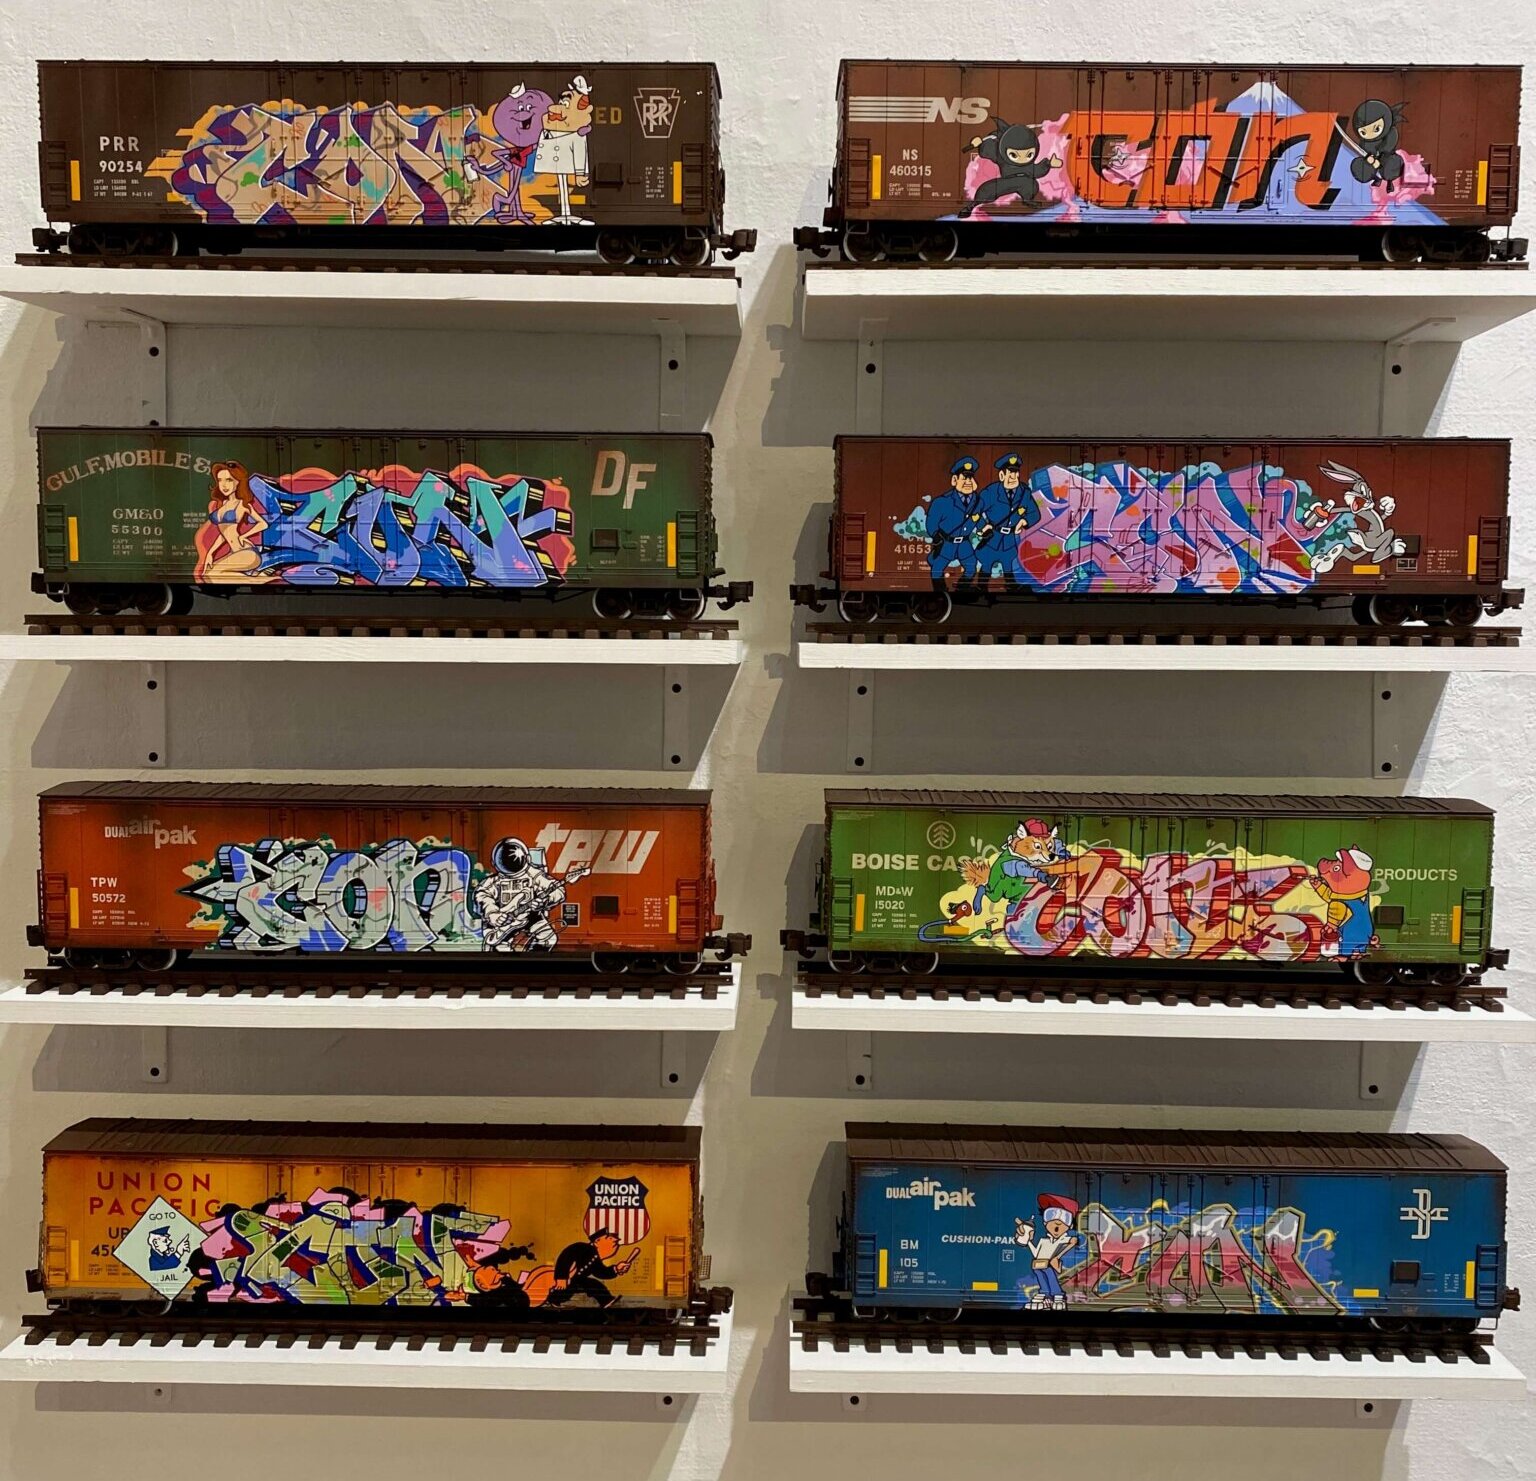 Various Trains by Tim Conlon in Beyond the Streets: Post Graffiti at Southampton Arts Center